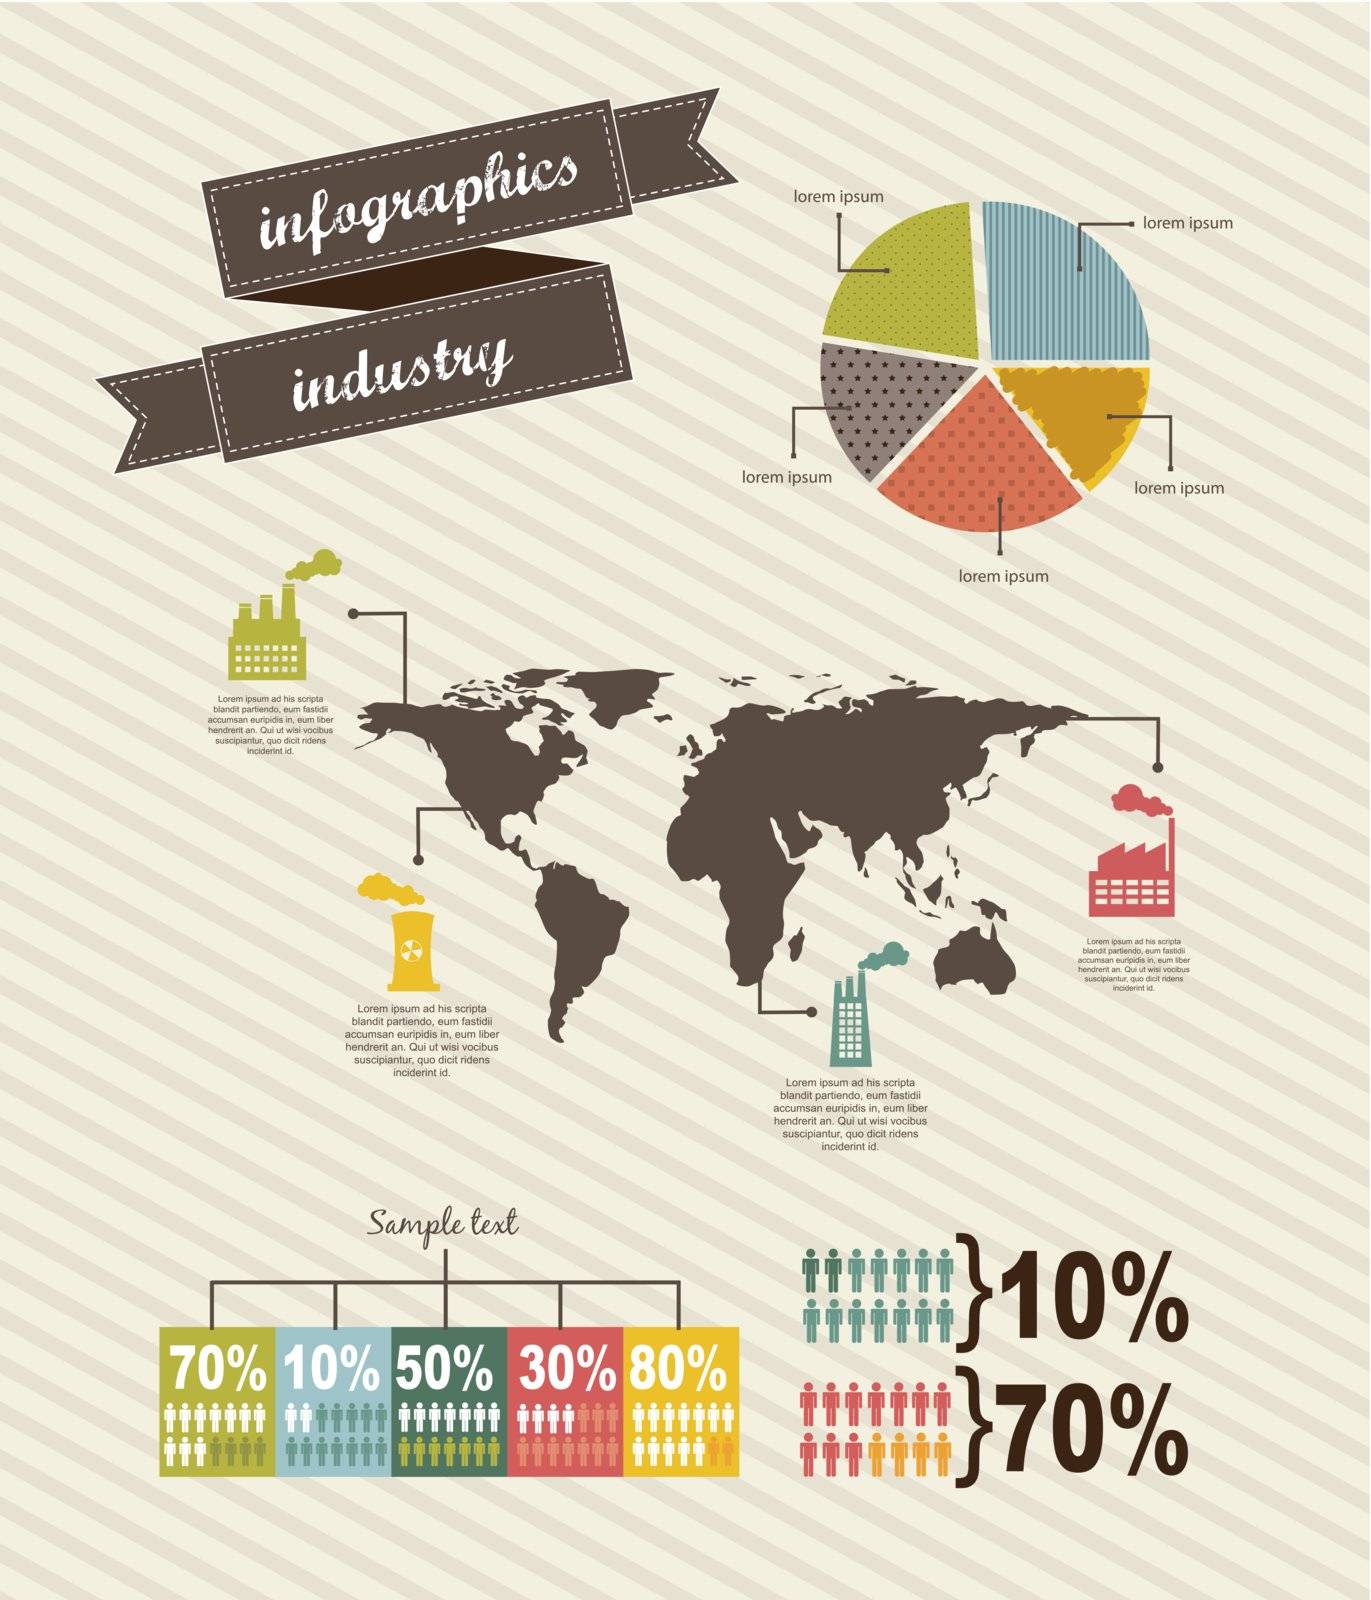 infographics of industry, vintage style. vector illustration